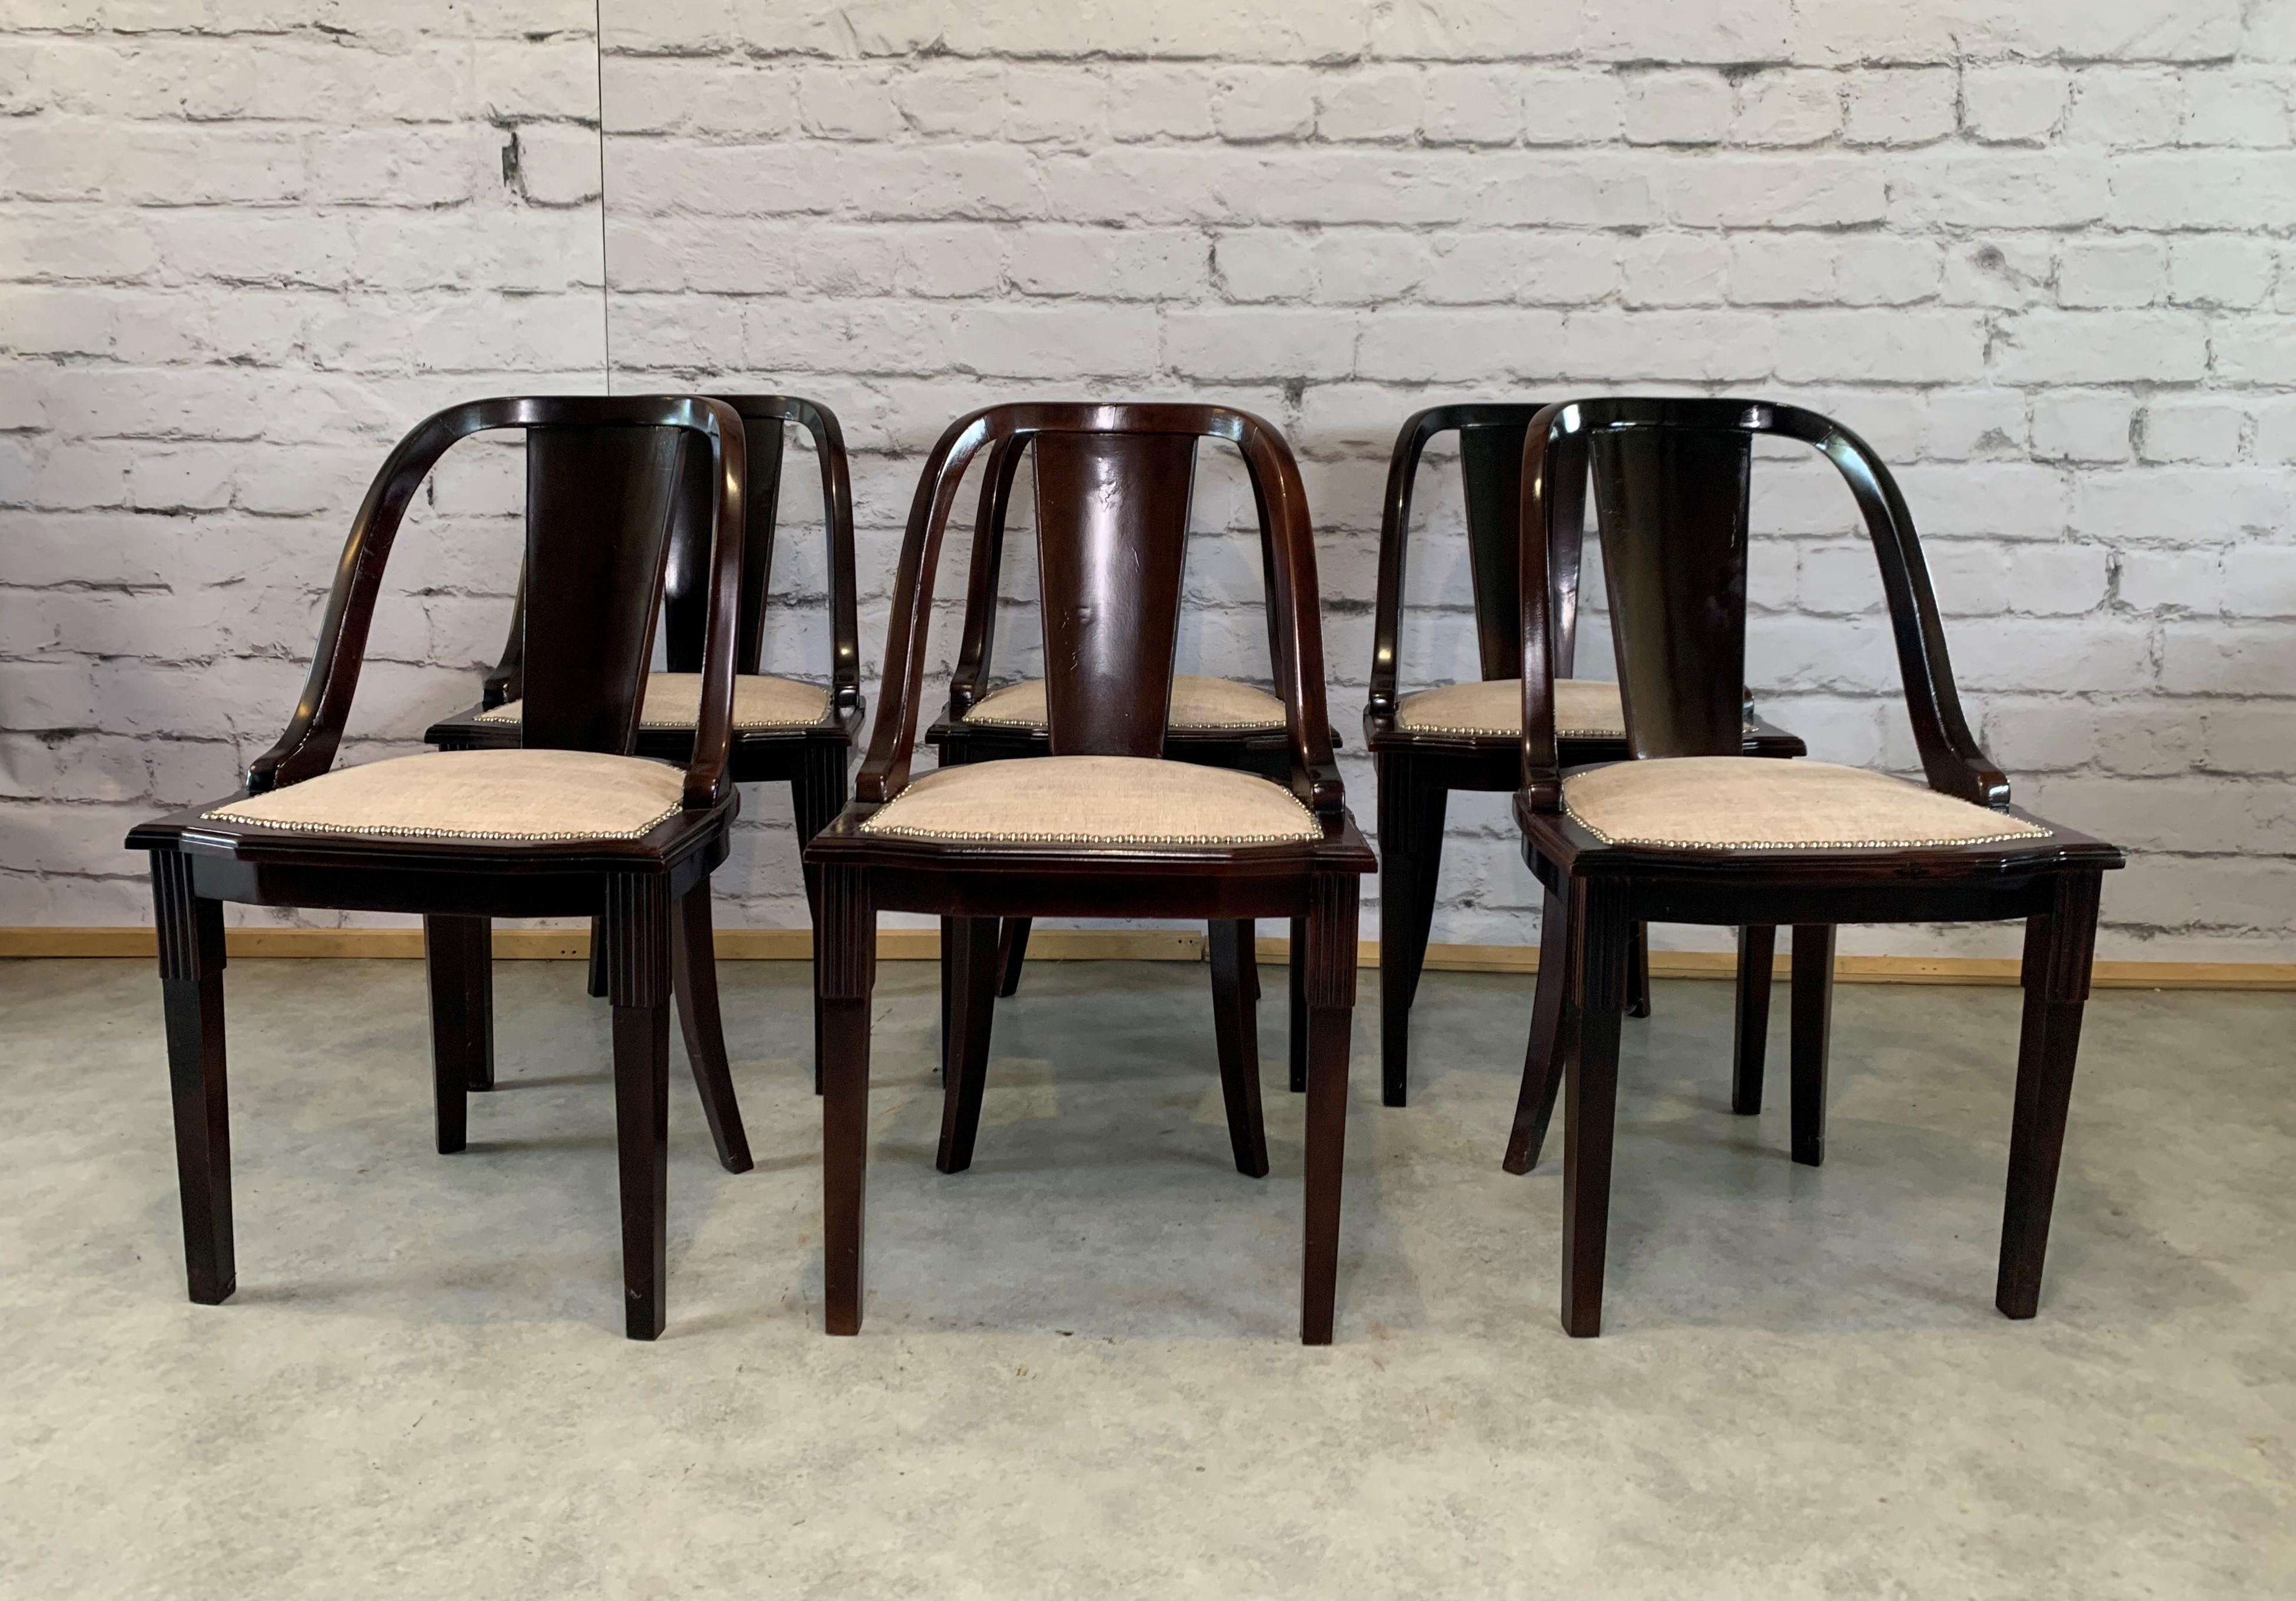 1930s dining chair styles